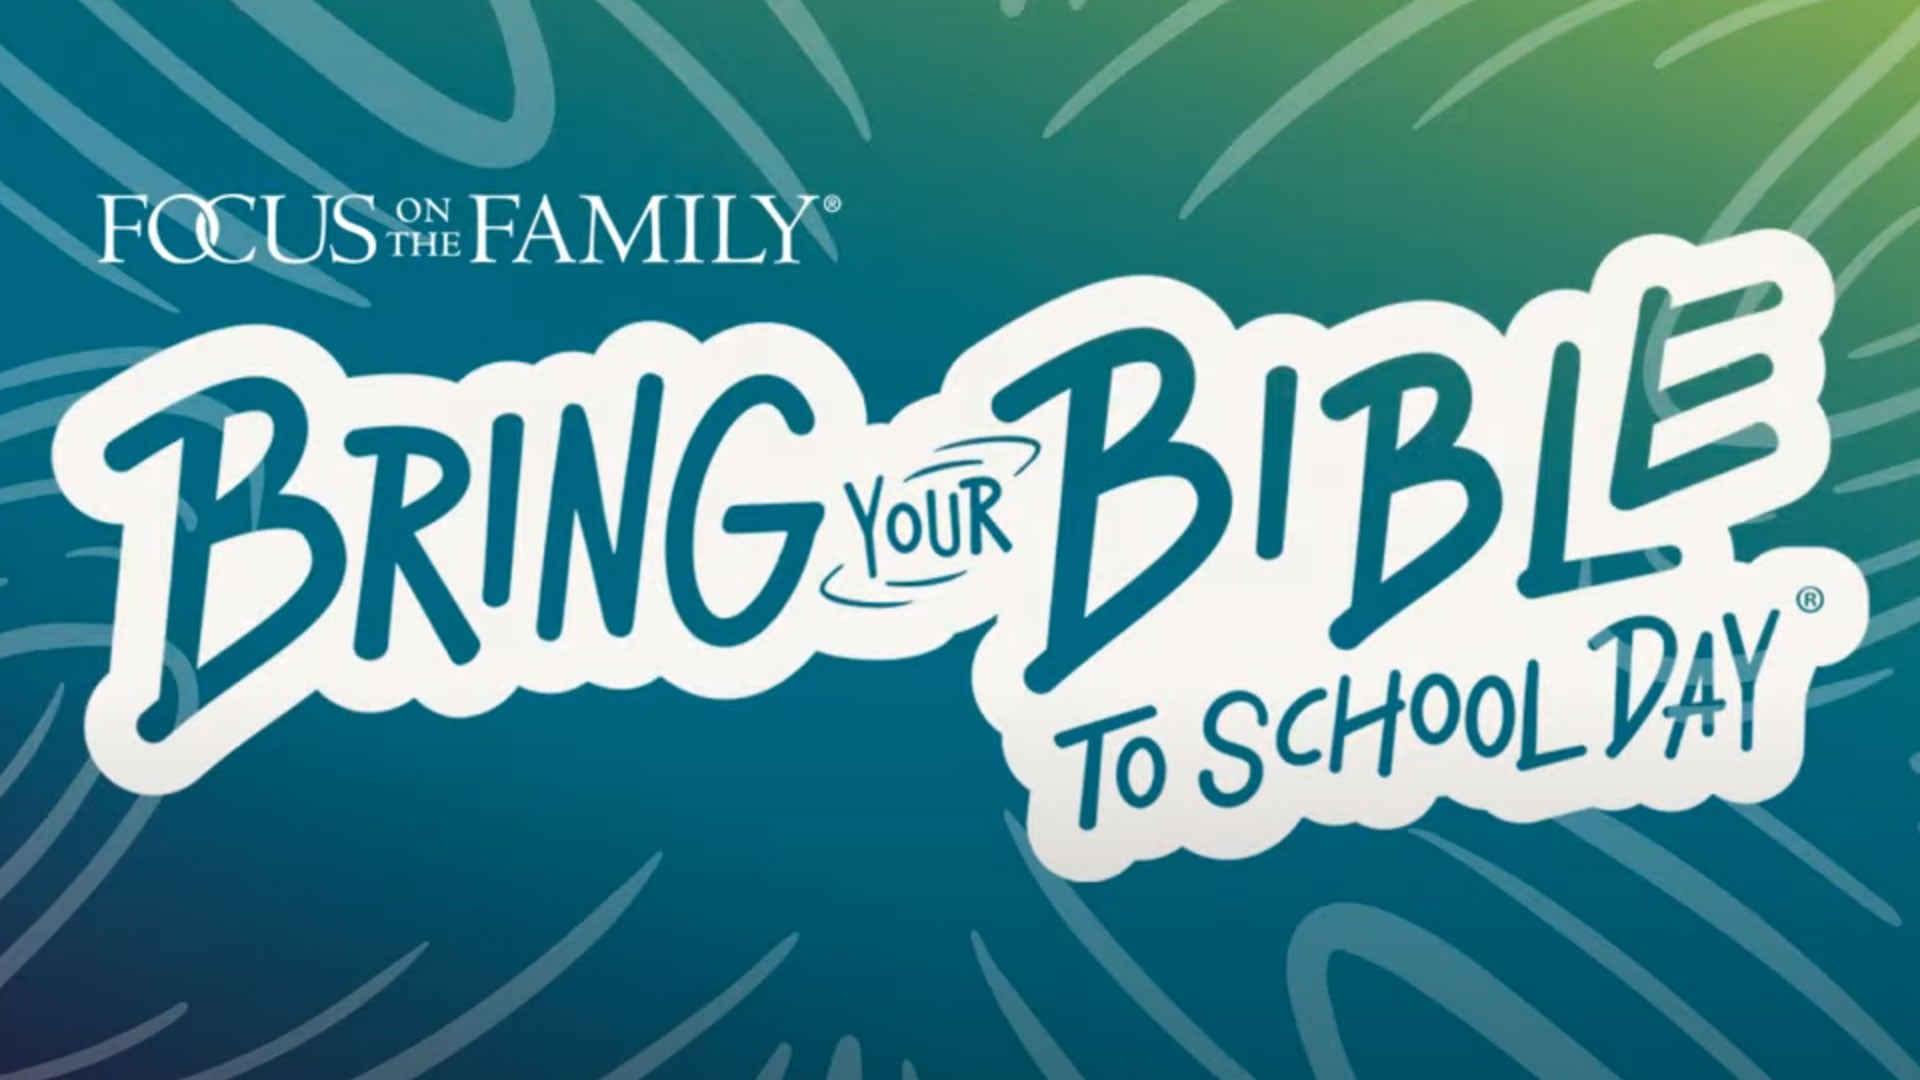 Focus on the Family Kicks off 'Bring Your Bible to School Day' on Oct